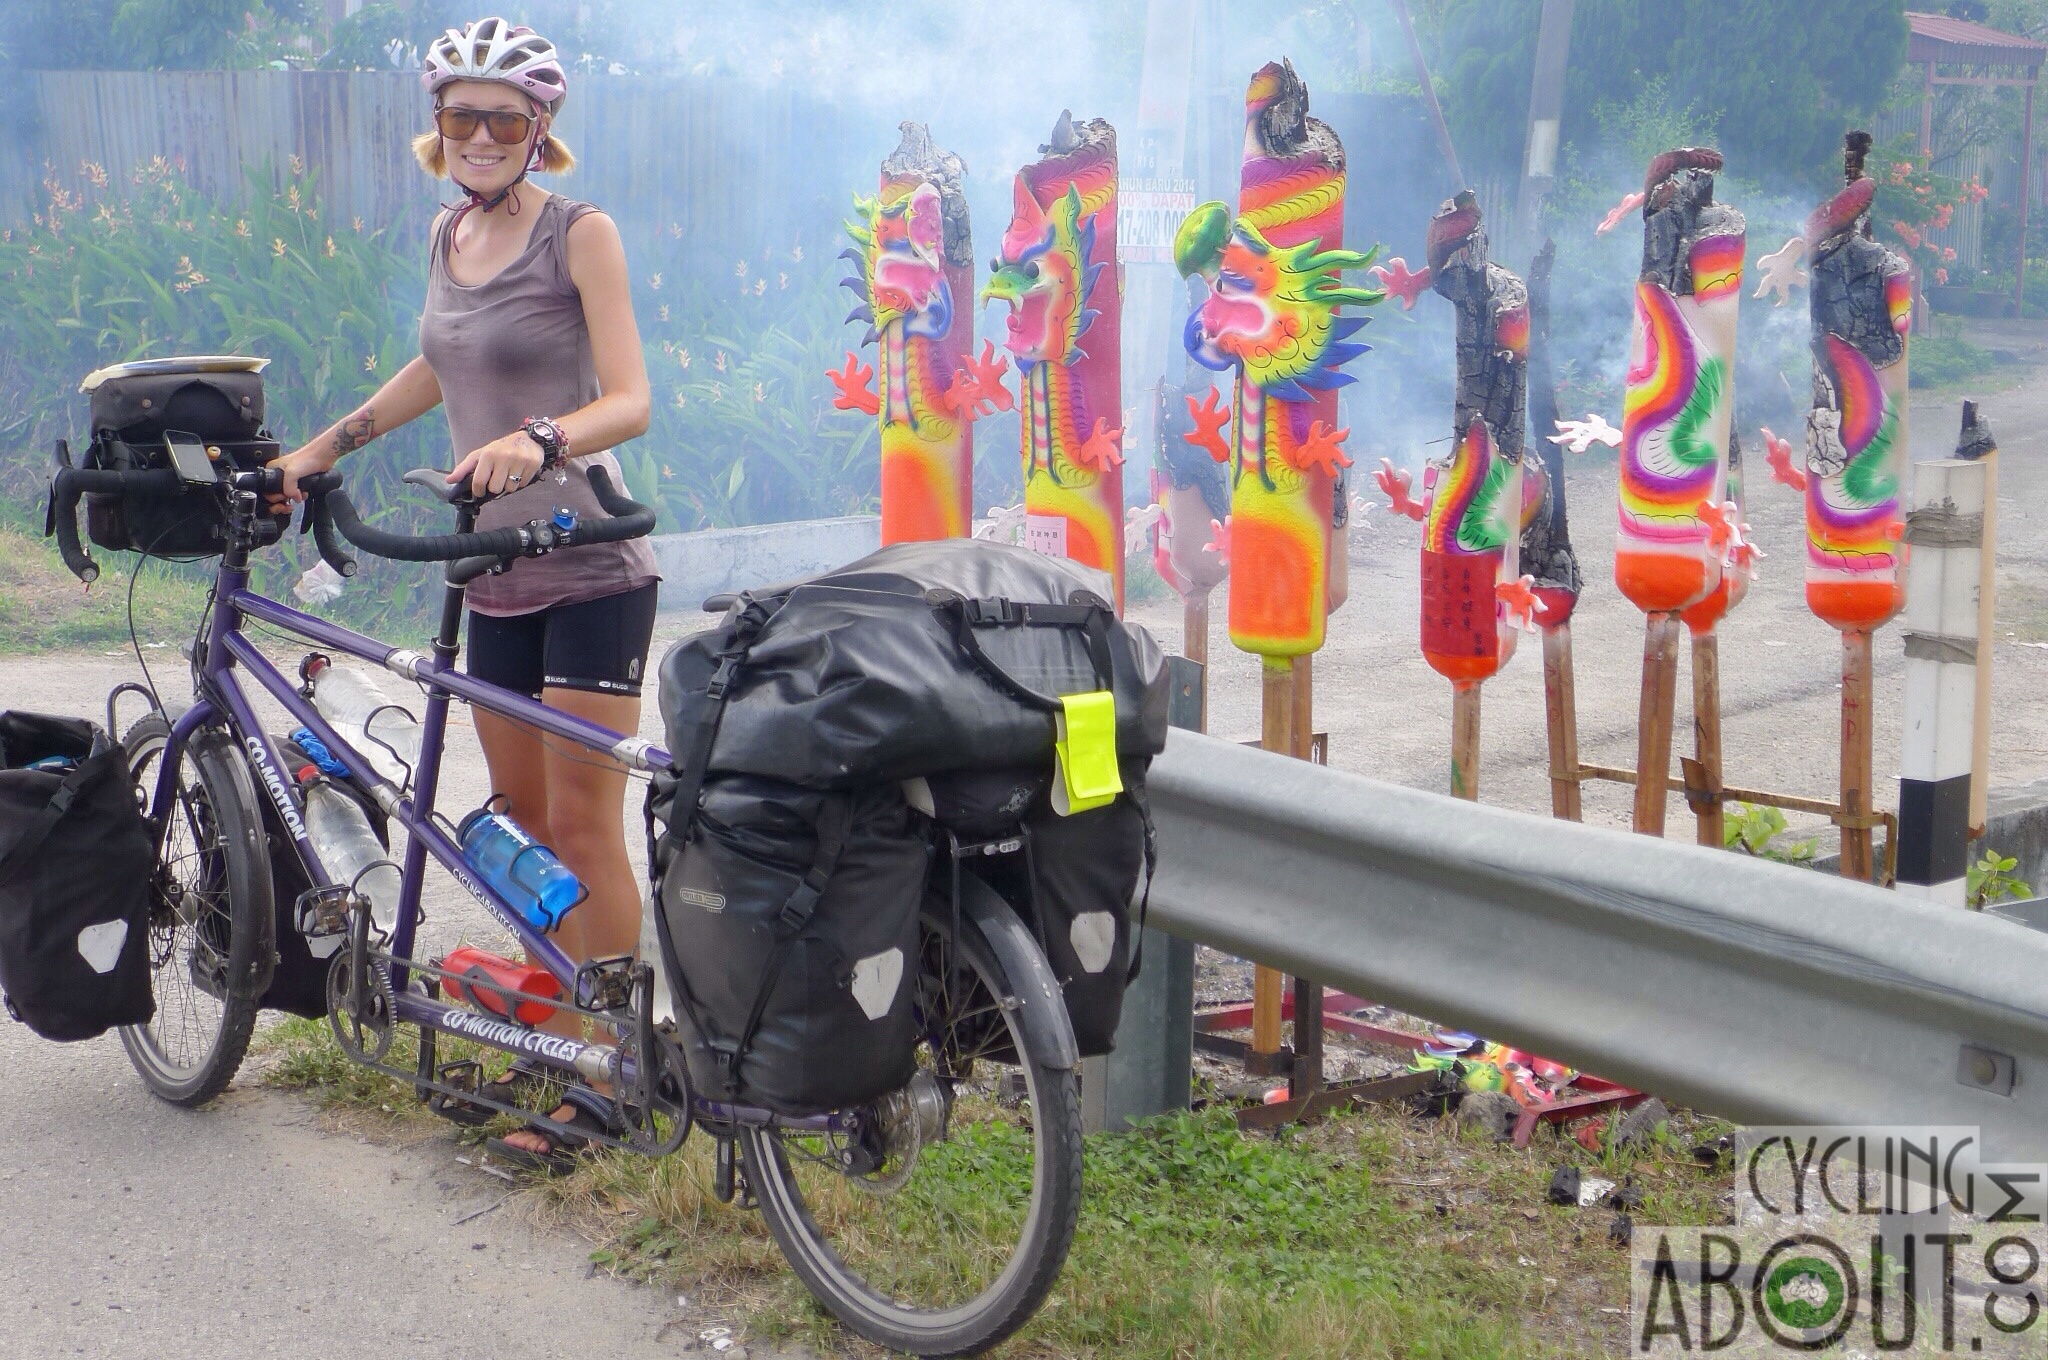 Cycling About Pedaling From Europe To Asia To Australia With intended for Cycling About